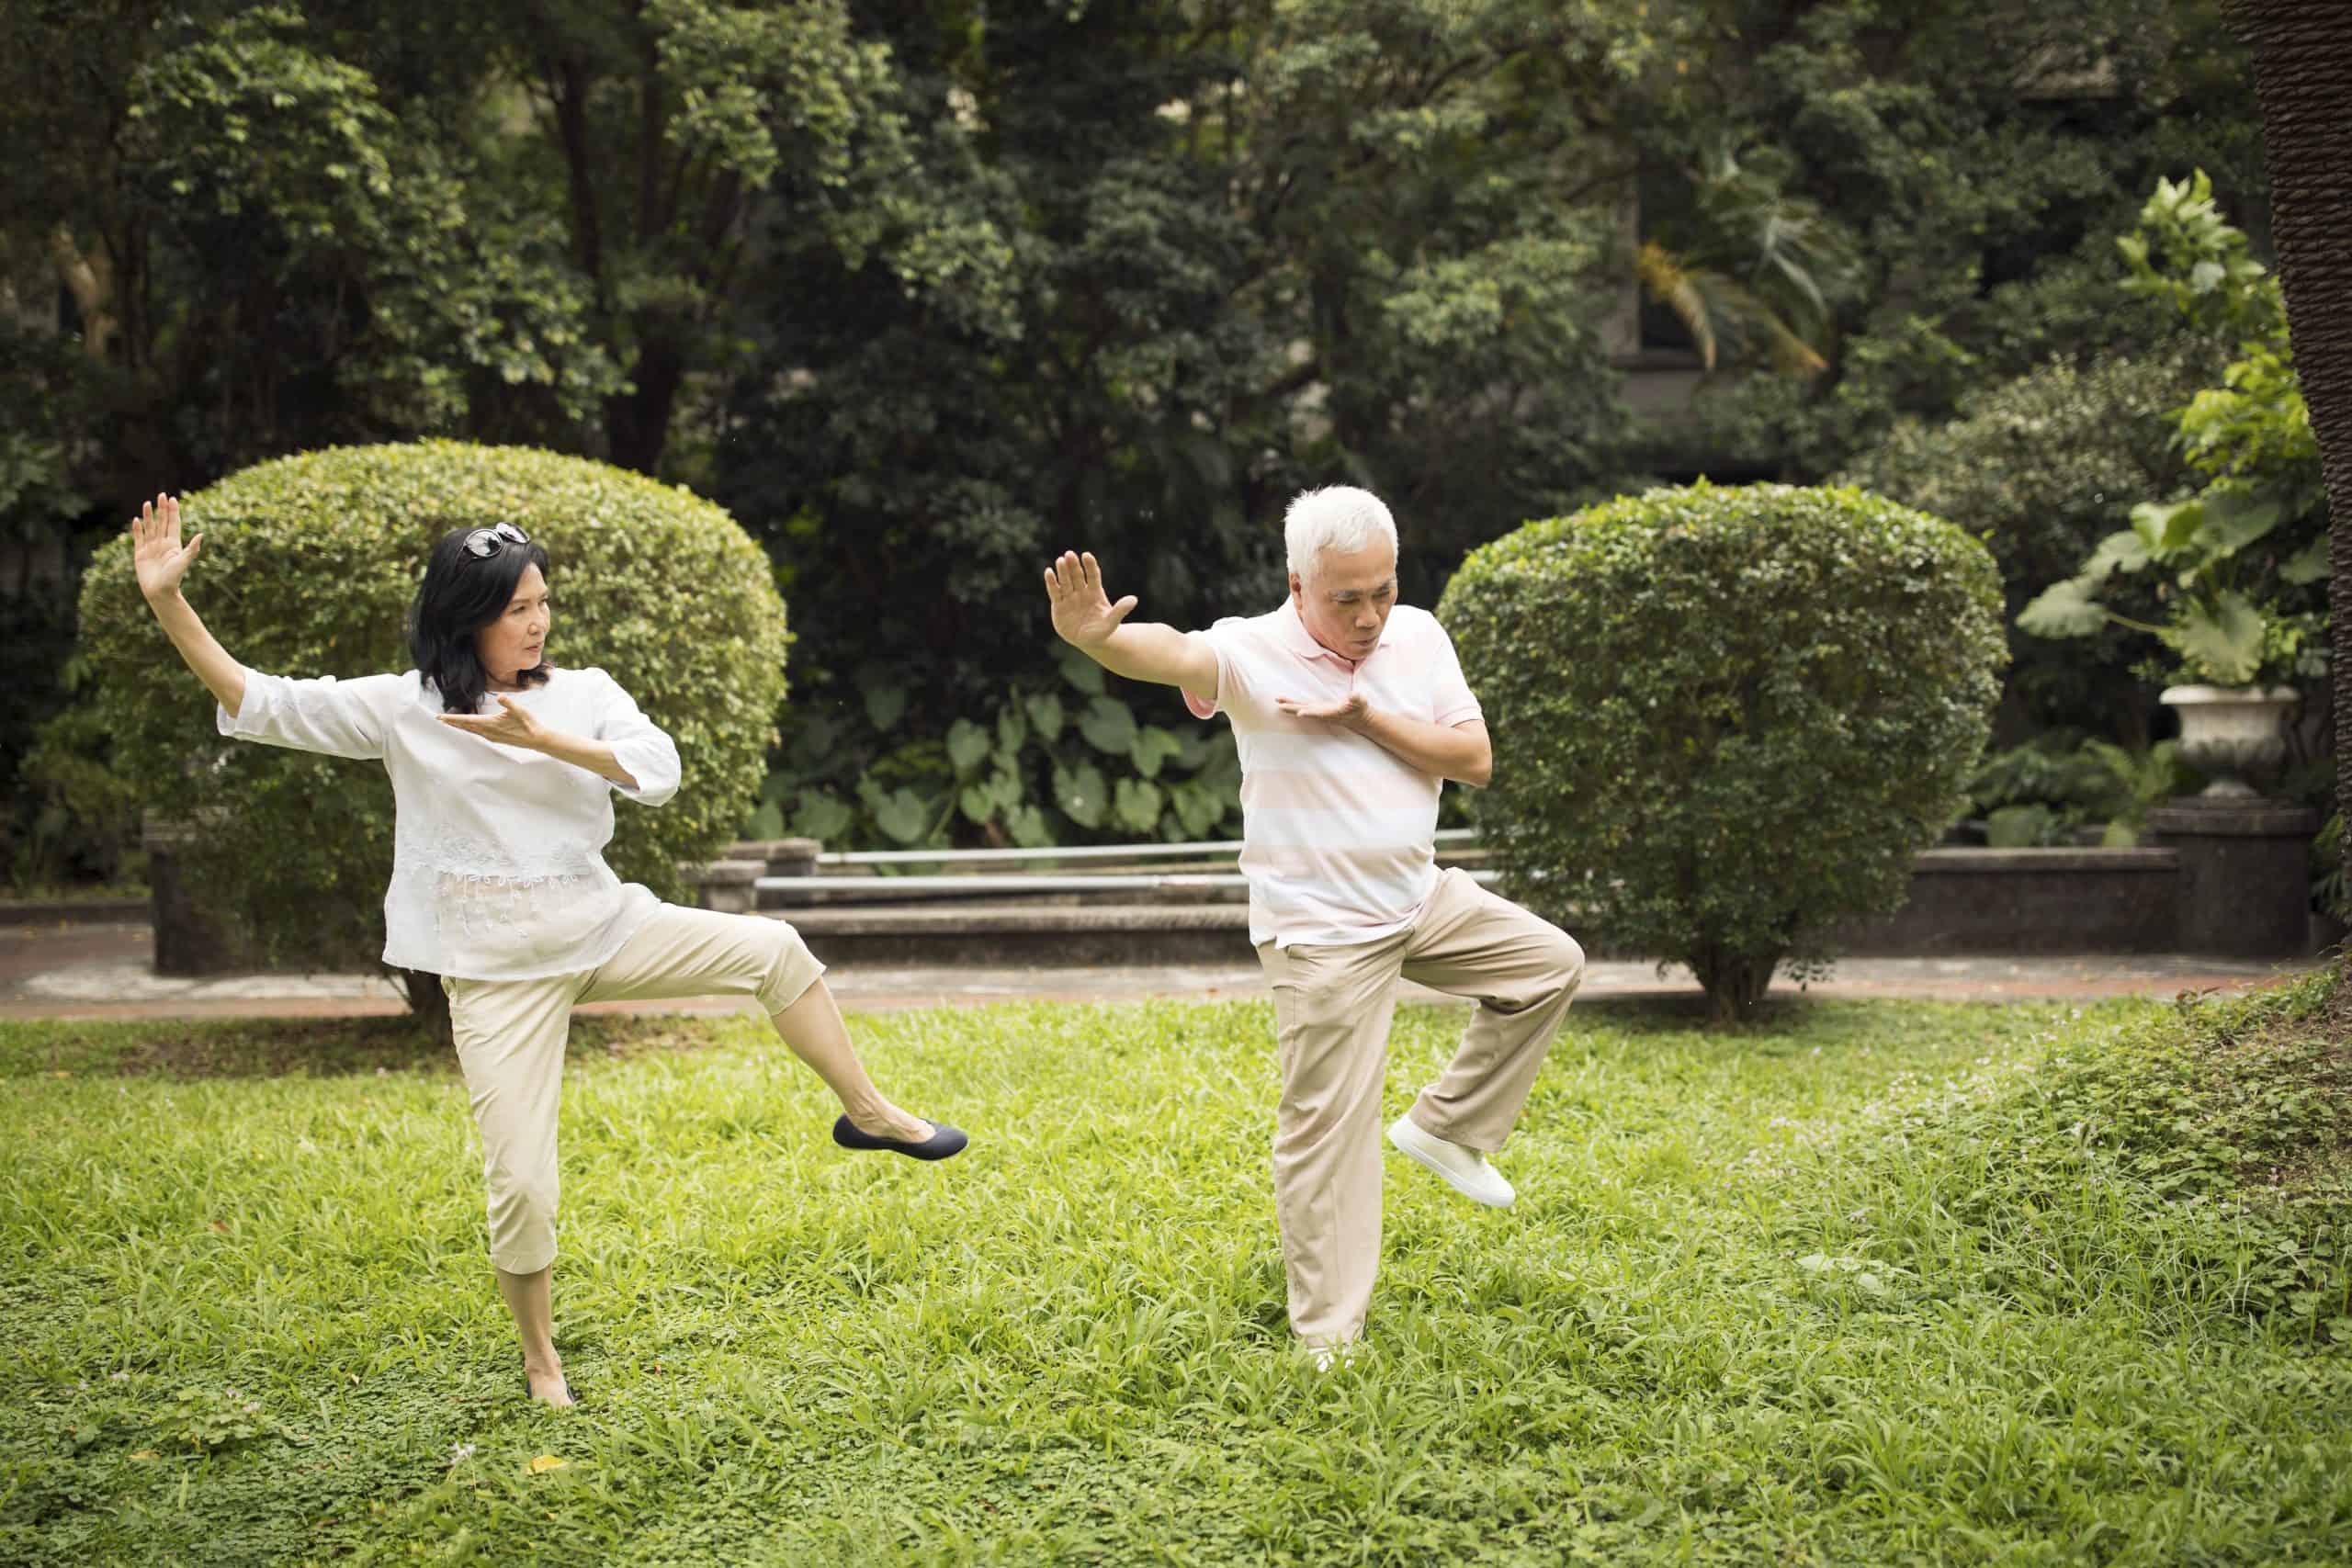 Older gentleman and adult woman practicing Tai-Chi in a park setting